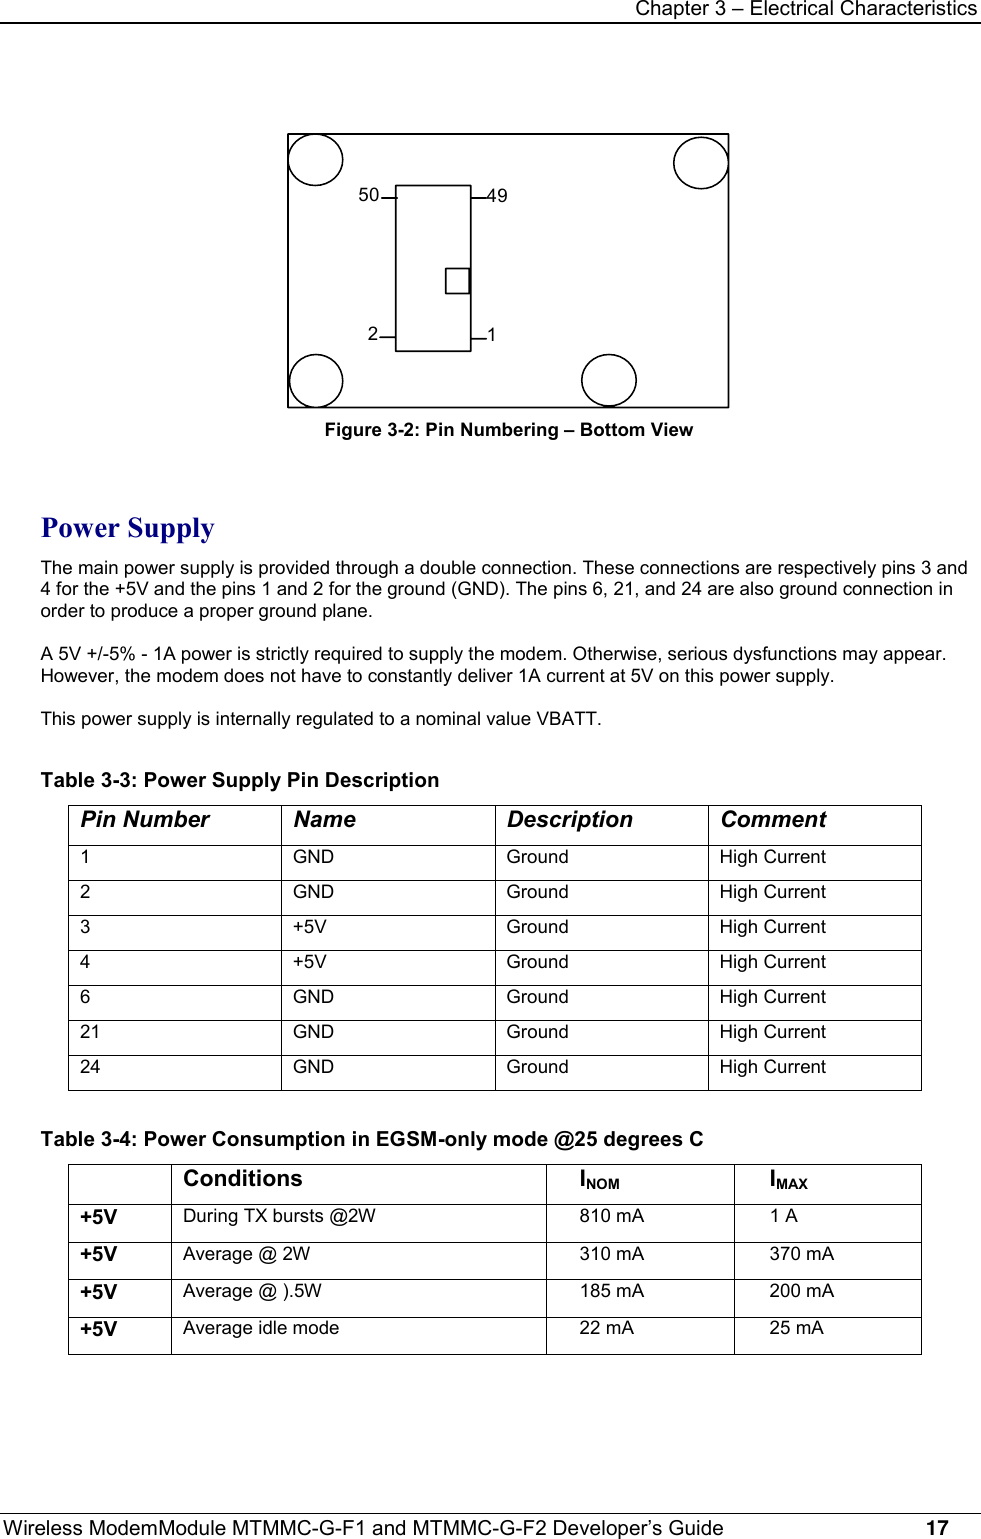 Chapter 3 – Electrical CharacteristicsWireless ModemModule MTMMC-G-F1 and MTMMC-G-F2 Developer’s Guide     1750 4921Figure 3-2: Pin Numbering – Bottom ViewPower SupplyThe main power supply is provided through a double connection. These connections are respectively pins 3 and4 for the +5V and the pins 1 and 2 for the ground (GND). The pins 6, 21, and 24 are also ground connection inorder to produce a proper ground plane.A 5V +/-5% - 1A power is strictly required to supply the modem. Otherwise, serious dysfunctions may appear.However, the modem does not have to constantly deliver 1A current at 5V on this power supply.This power supply is internally regulated to a nominal value VBATT.Table 3-3: Power Supply Pin DescriptionPin Number Name Description Comment1 GND Ground High Current2 GND Ground High Current3 +5V Ground High Current4 +5V Ground High Current6 GND Ground High Current21 GND Ground High Current24 GND Ground High CurrentTable 3-4: Power Consumption in EGSM-only mode @25 degrees CConditions INOM IMAX+5V During TX bursts @2W 810 mA 1 A+5V Average @ 2W 310 mA 370 mA+5V Average @ ).5W 185 mA 200 mA+5V Average idle mode 22 mA 25 mA